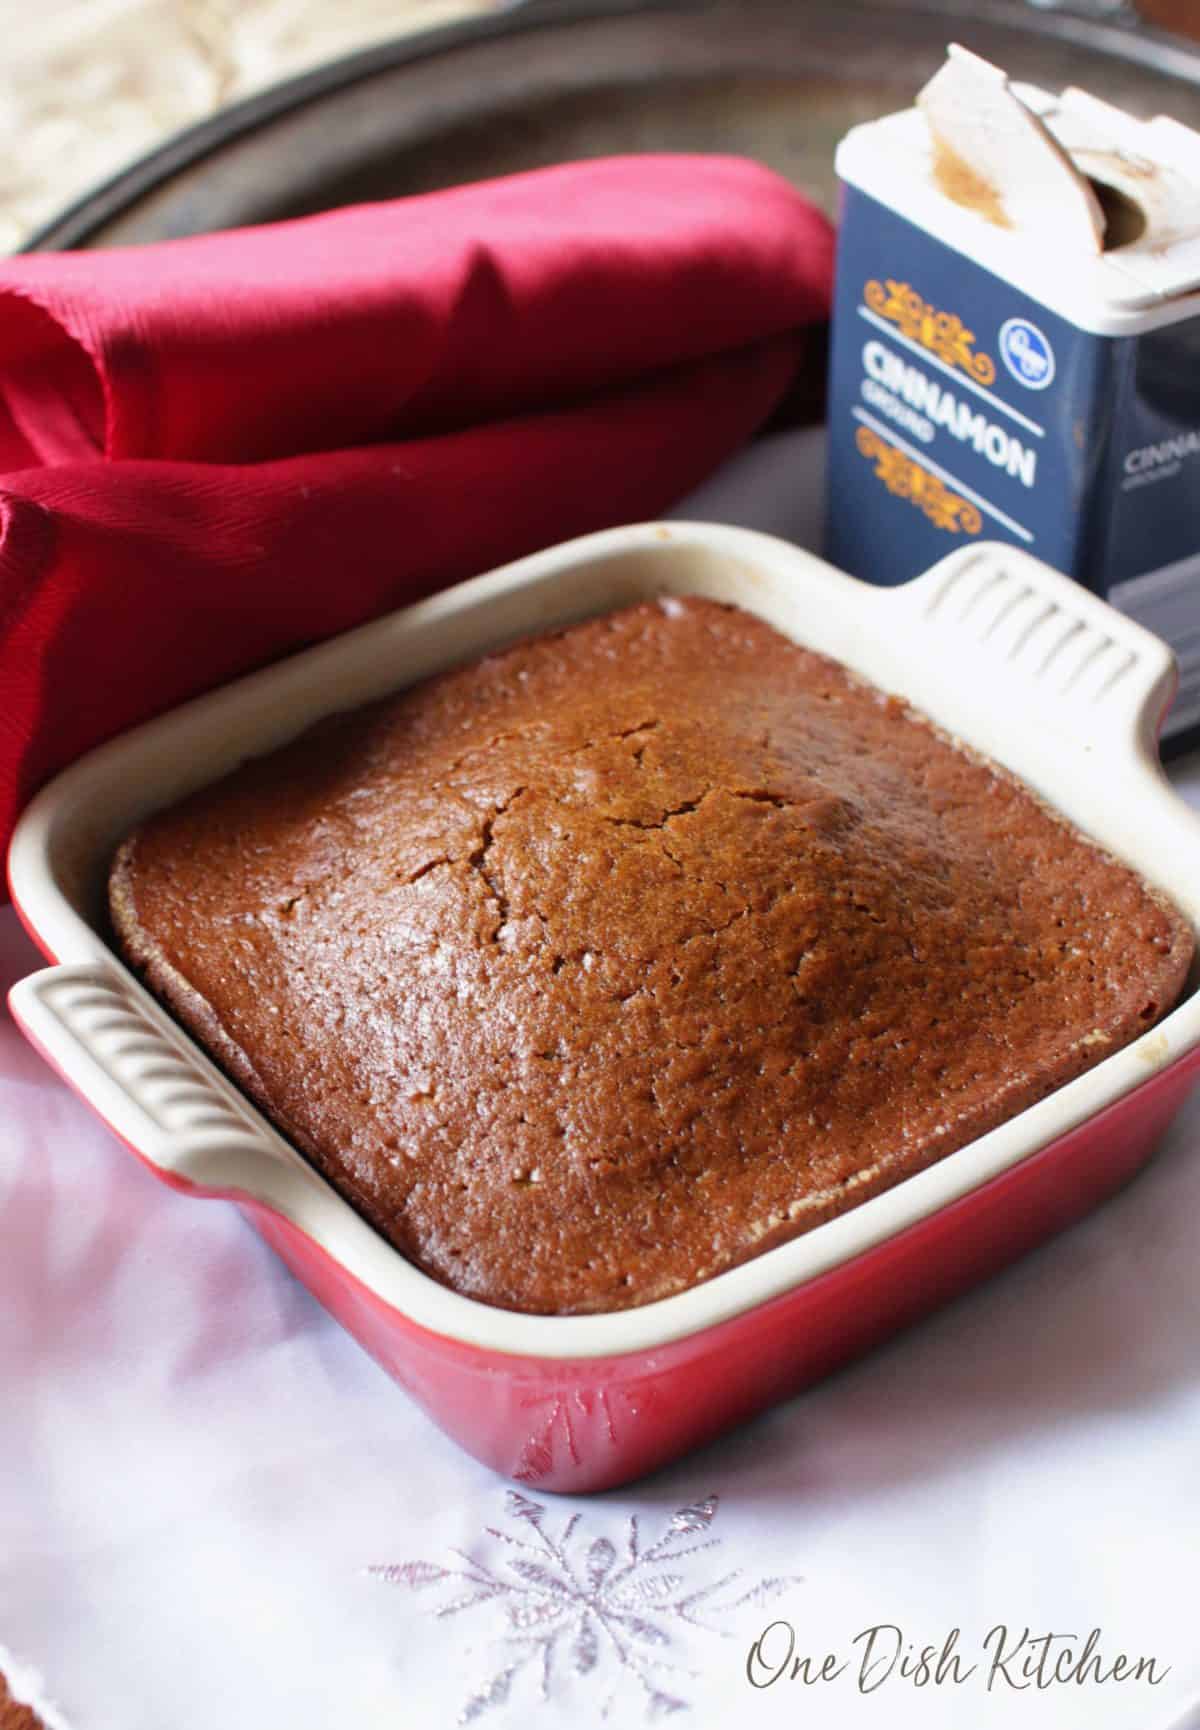 a small gingerbread cake in a red baking dish.